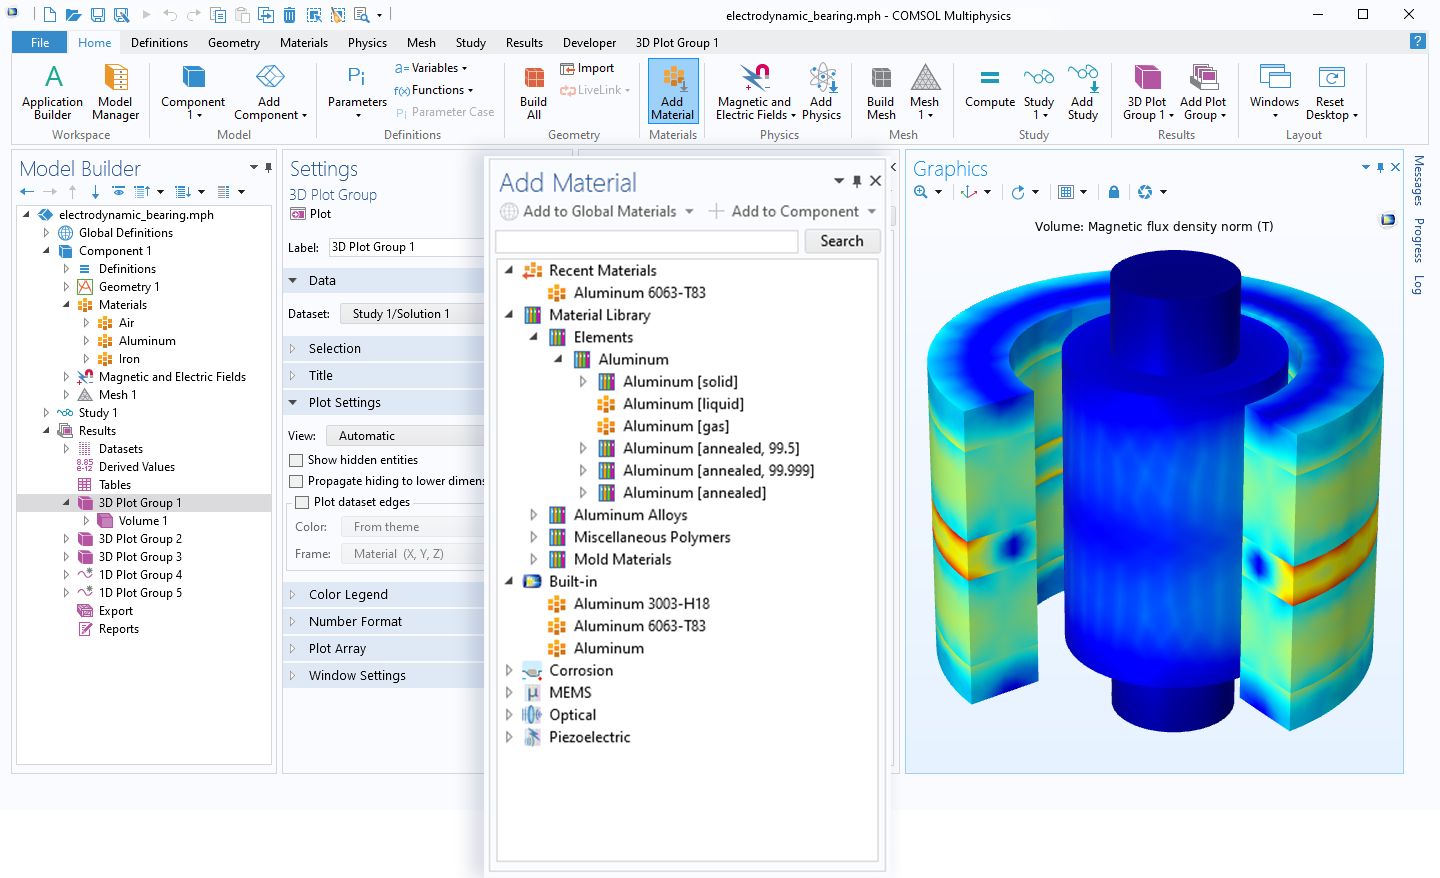 The Add Material window overlaid on a COMSOL Multiphysics UI with an electrodynamic bearing model in the Graphics window.